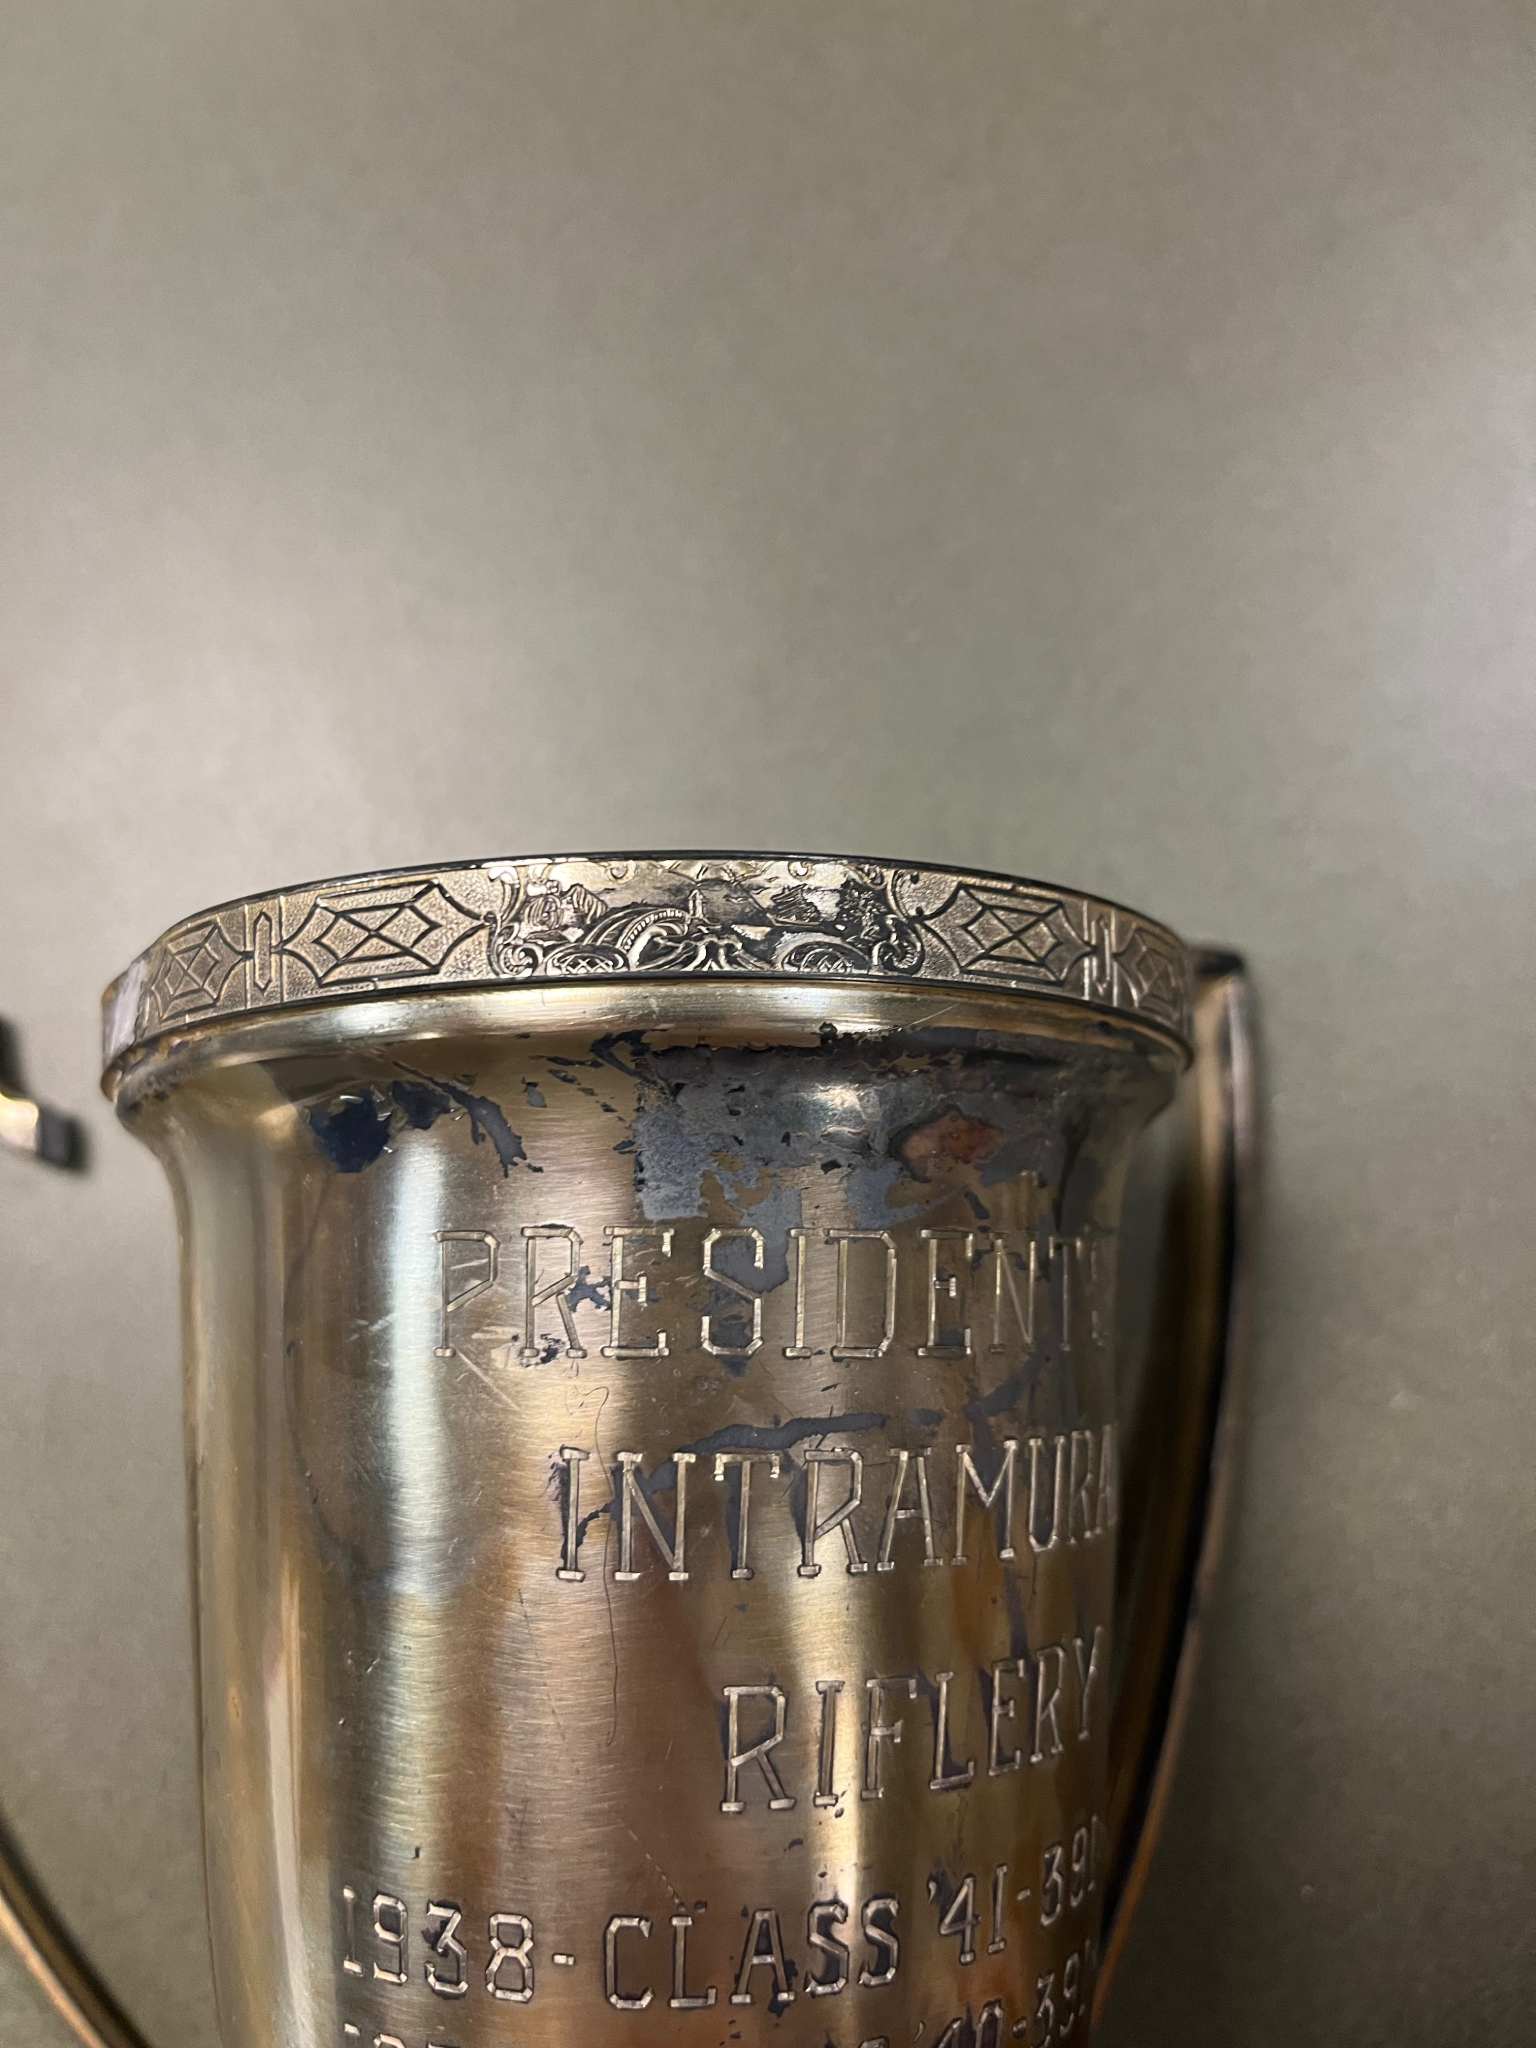 A close up view of an aged silver trophy engraved with "President’s Cup Intramural Riflery Trophy dating from 1938-1948."